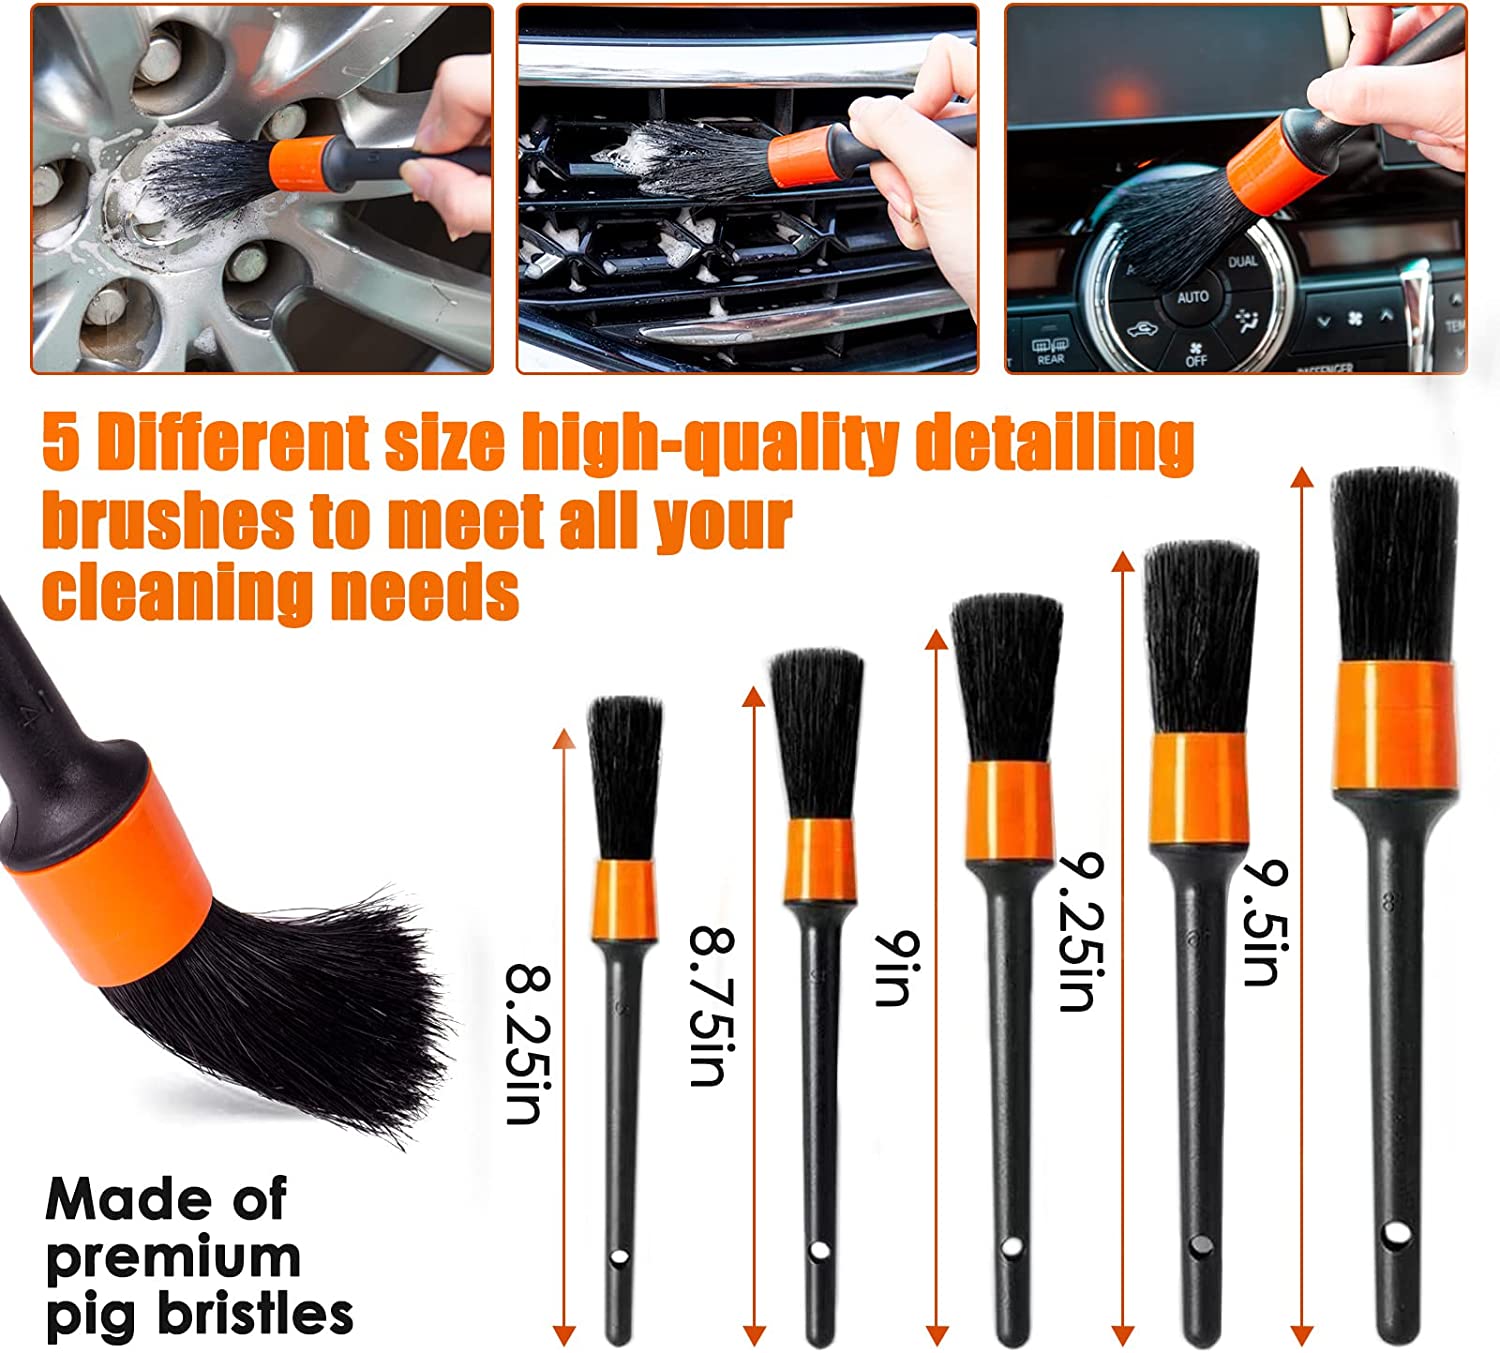 MateAuto Car Detailing Brush Set,20pcs Drill Brush Set,Car Interior Detailing Kit & Car Wash Kit with Boar Hair Detail Brush and Cleaning Gel for